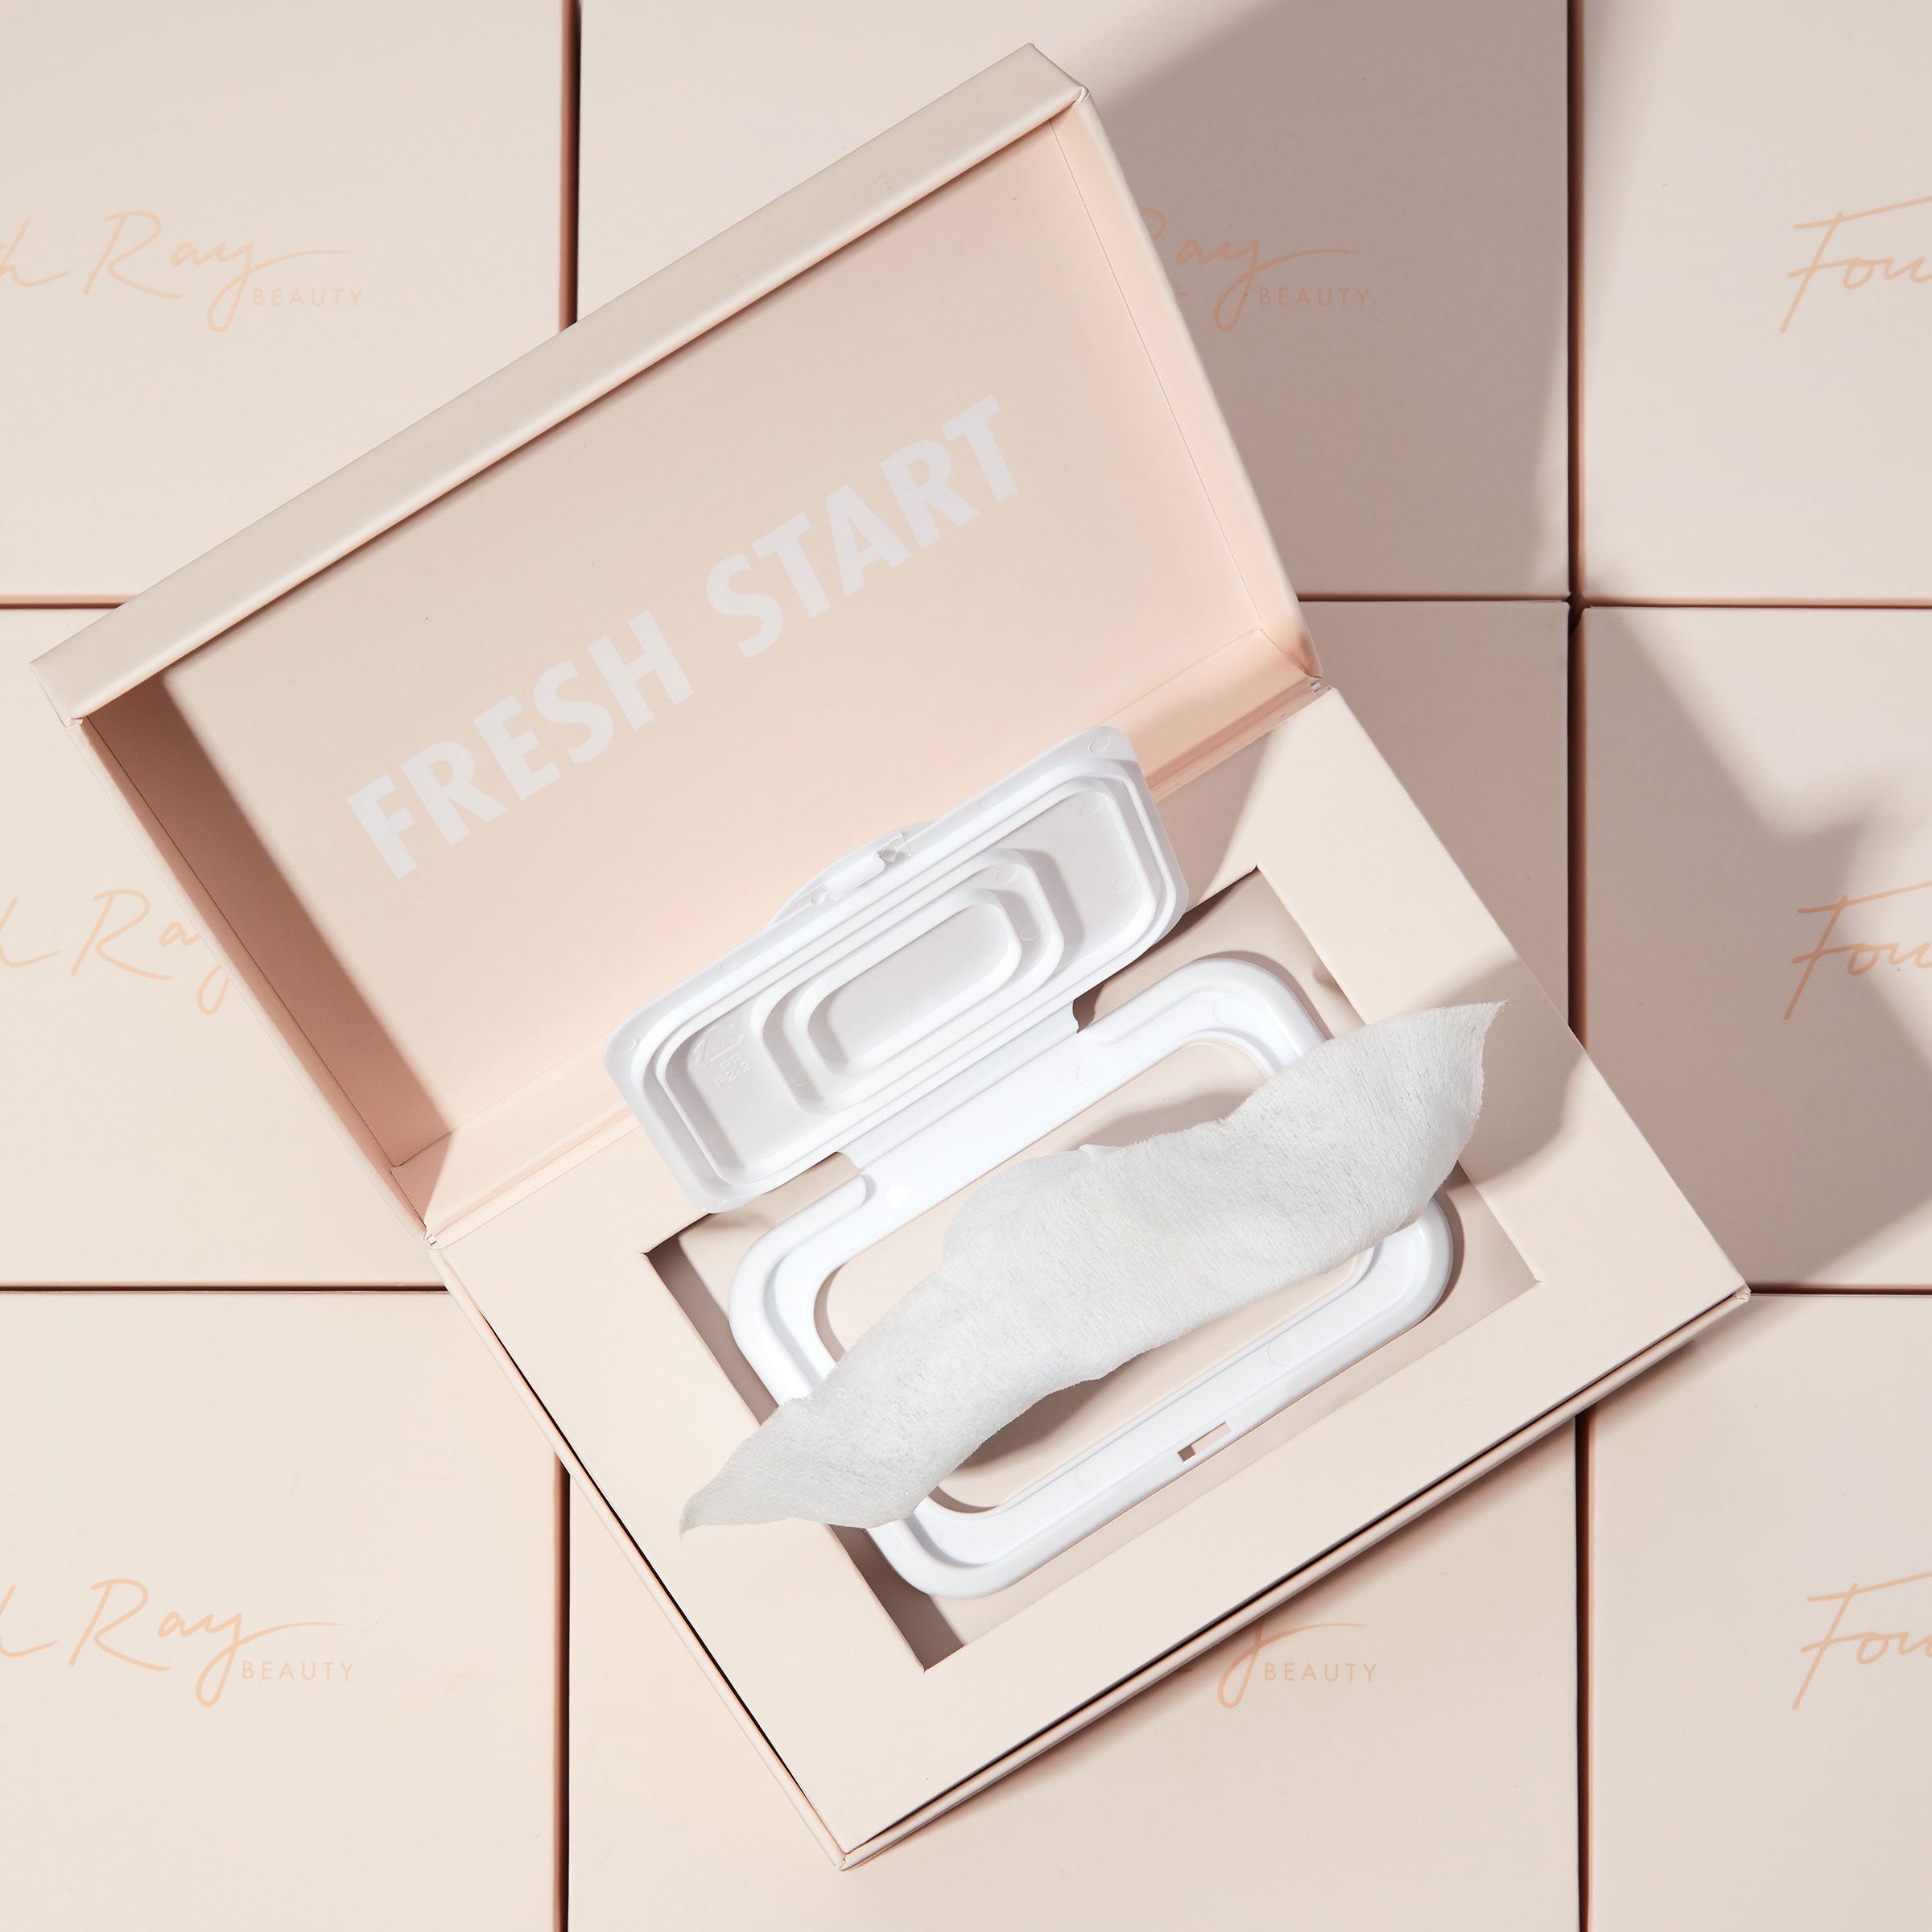 Fourth Ray Beauty Super Fresh Cleansing Towelettes Box Set